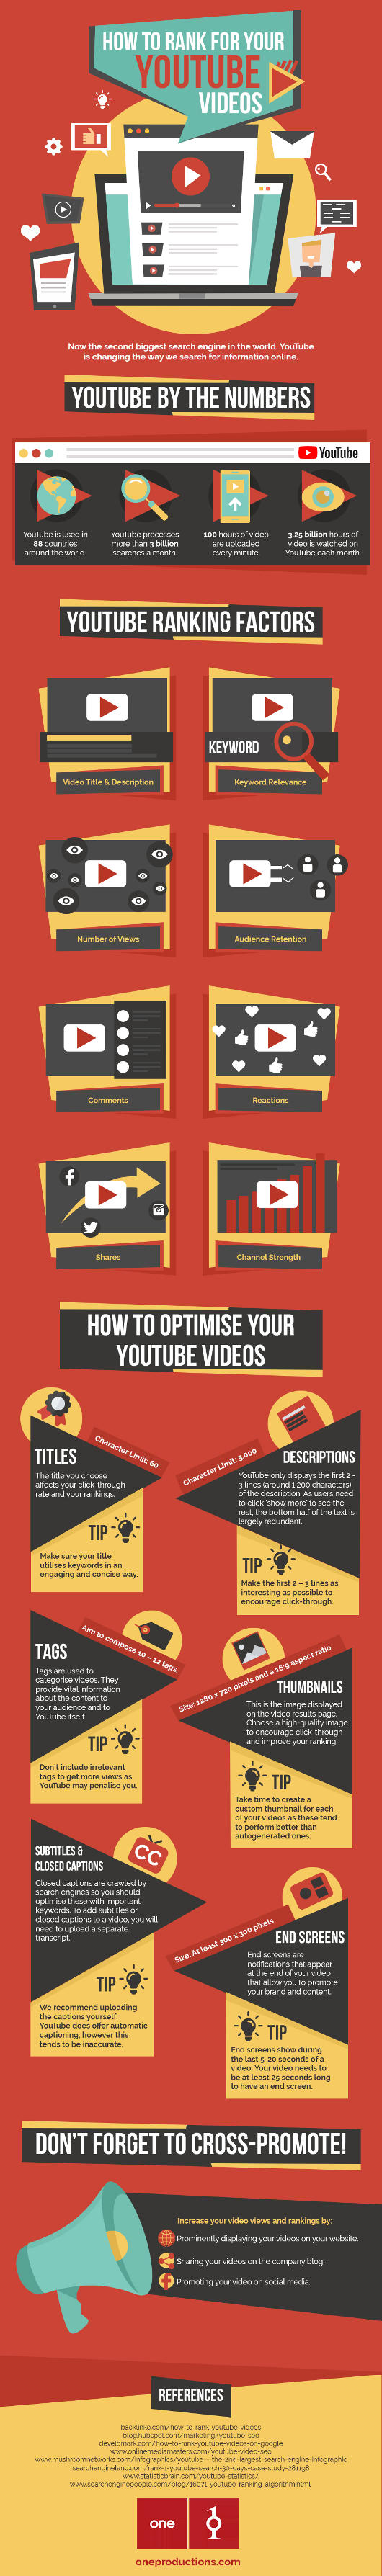 How to Get Your YouTube Videos to Rank in Search Results